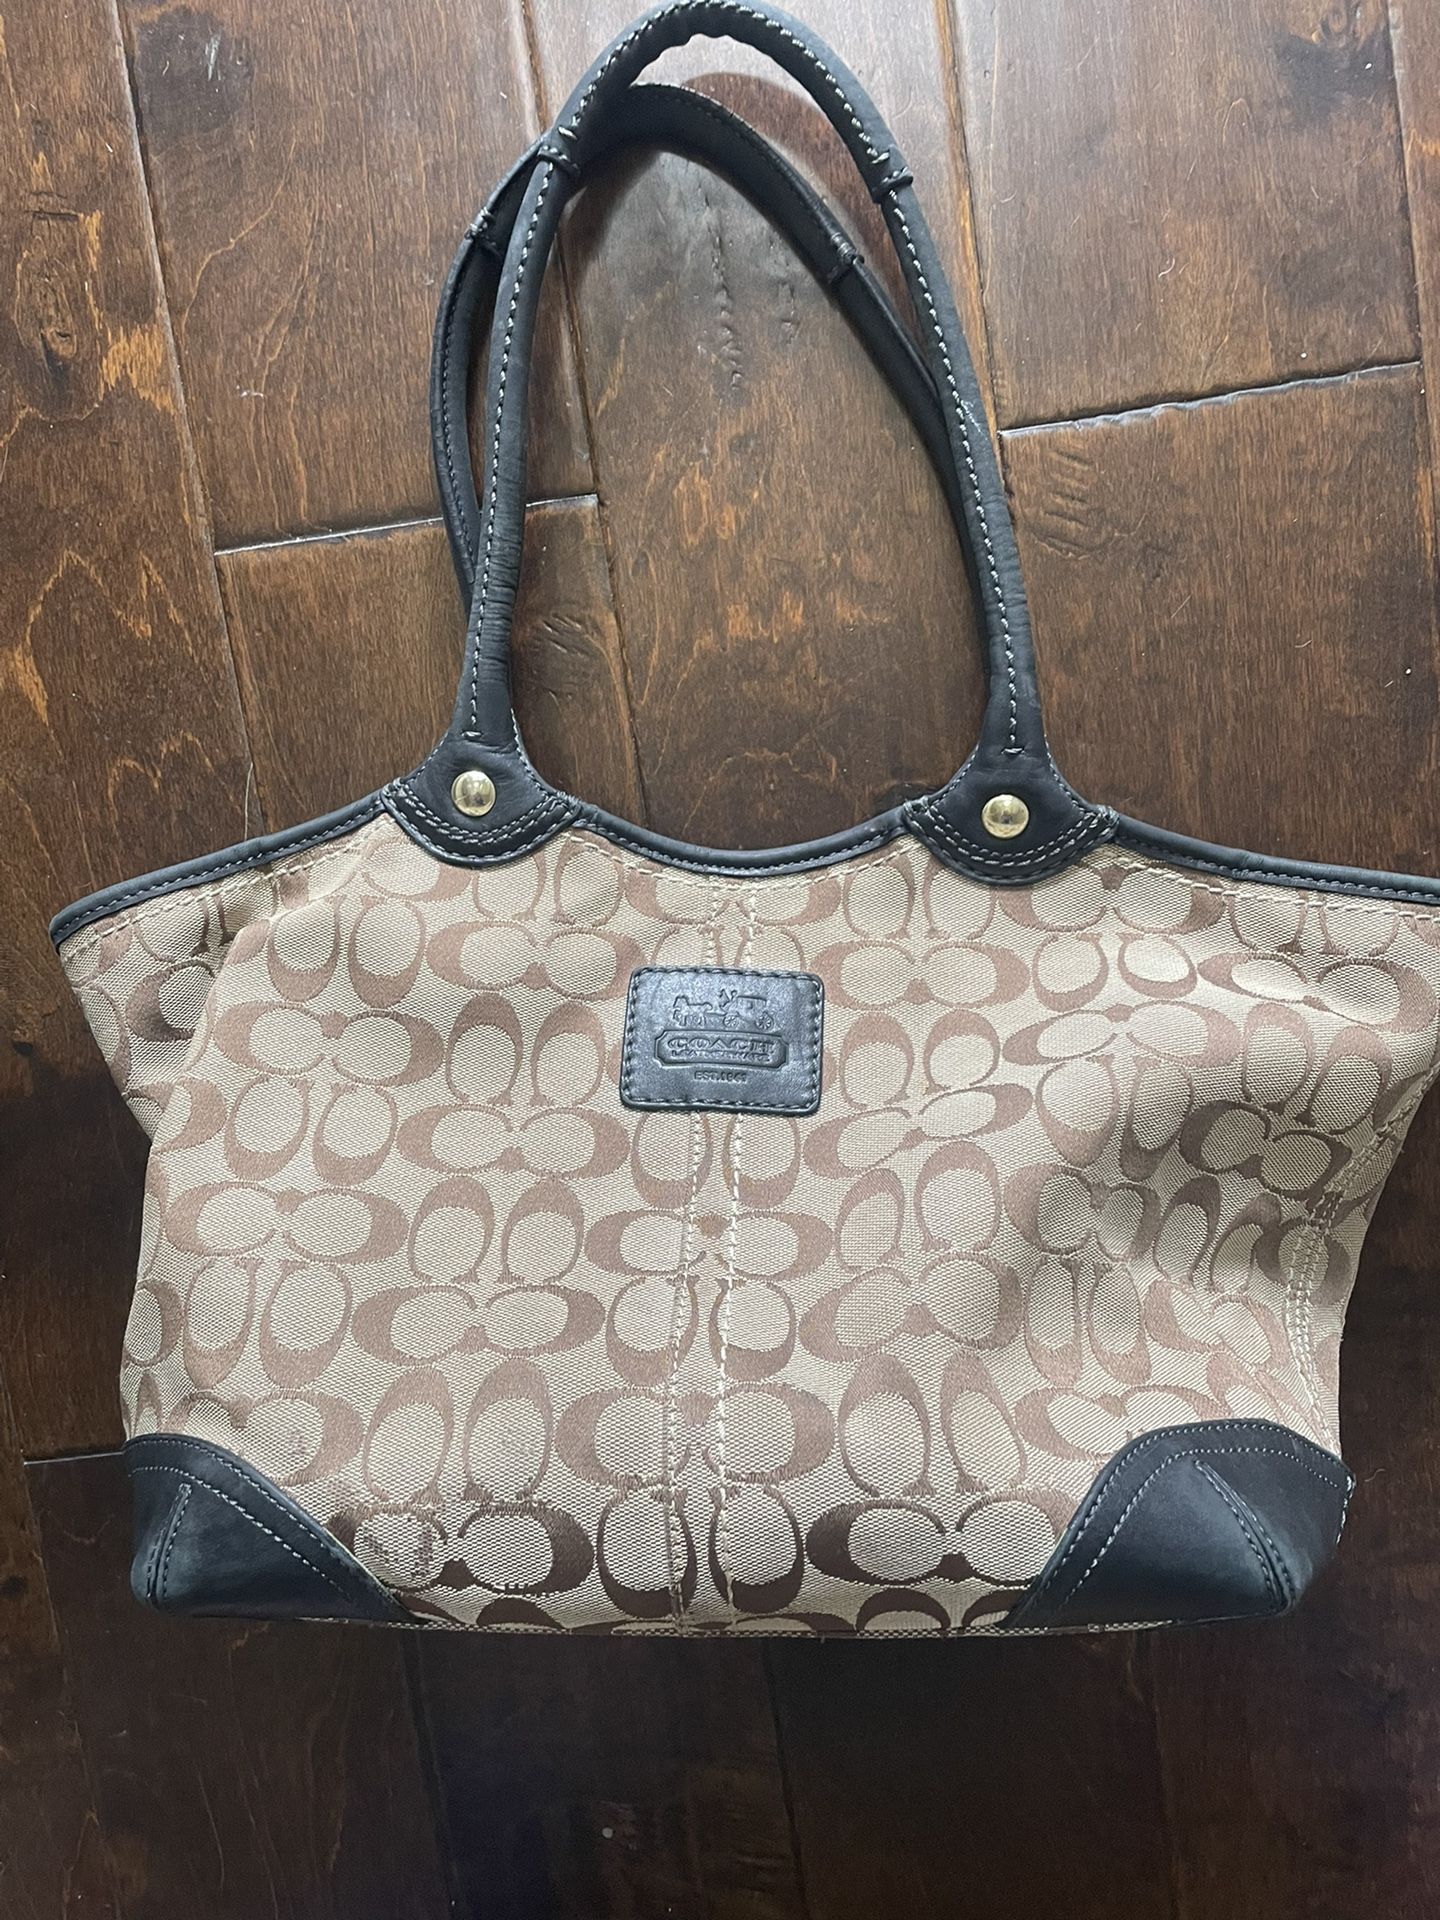  Coach Large Tote